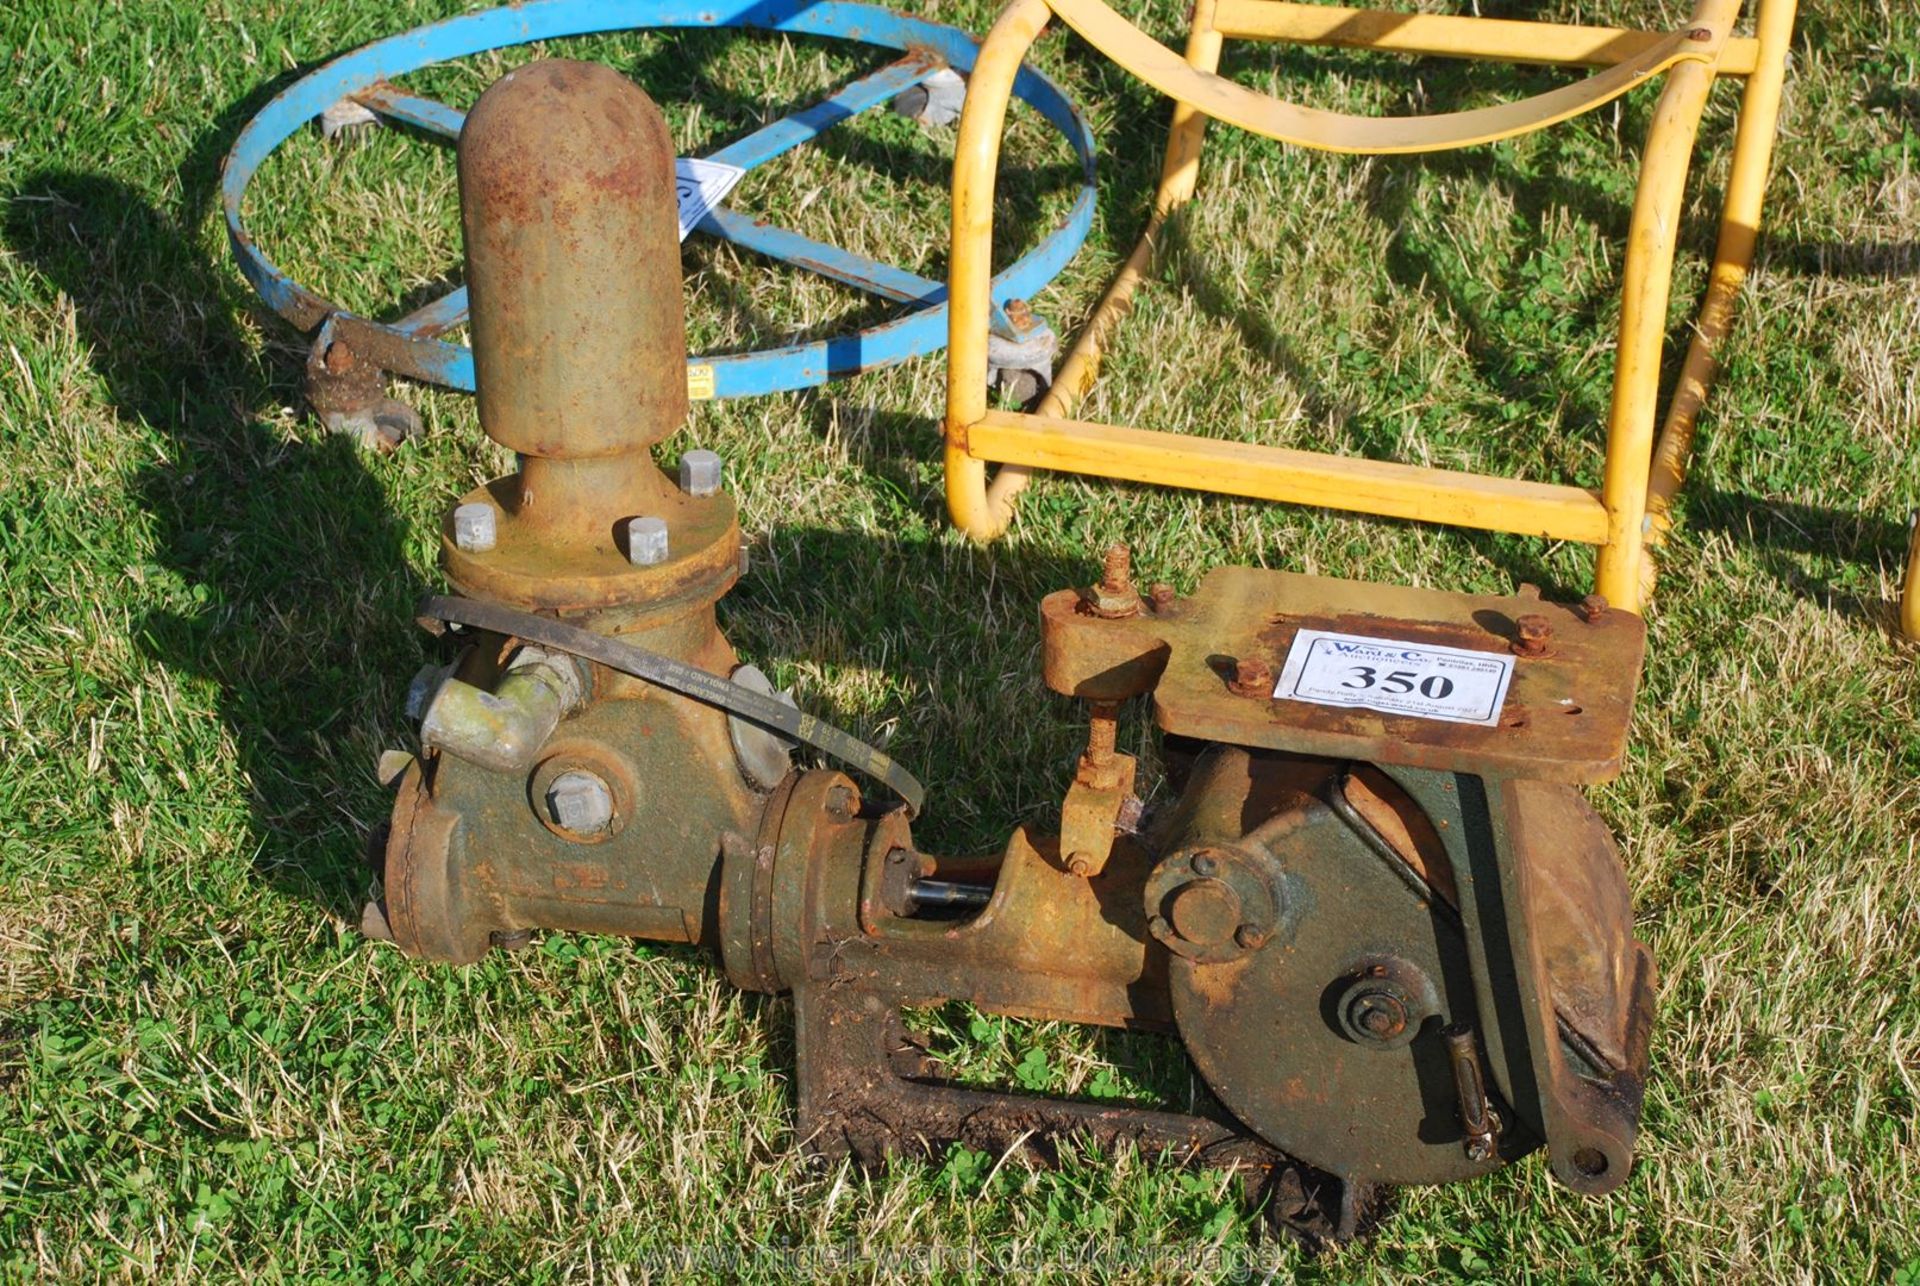 A Lister style reciprocating water pump, rotates freely but has a crack from frost damage.